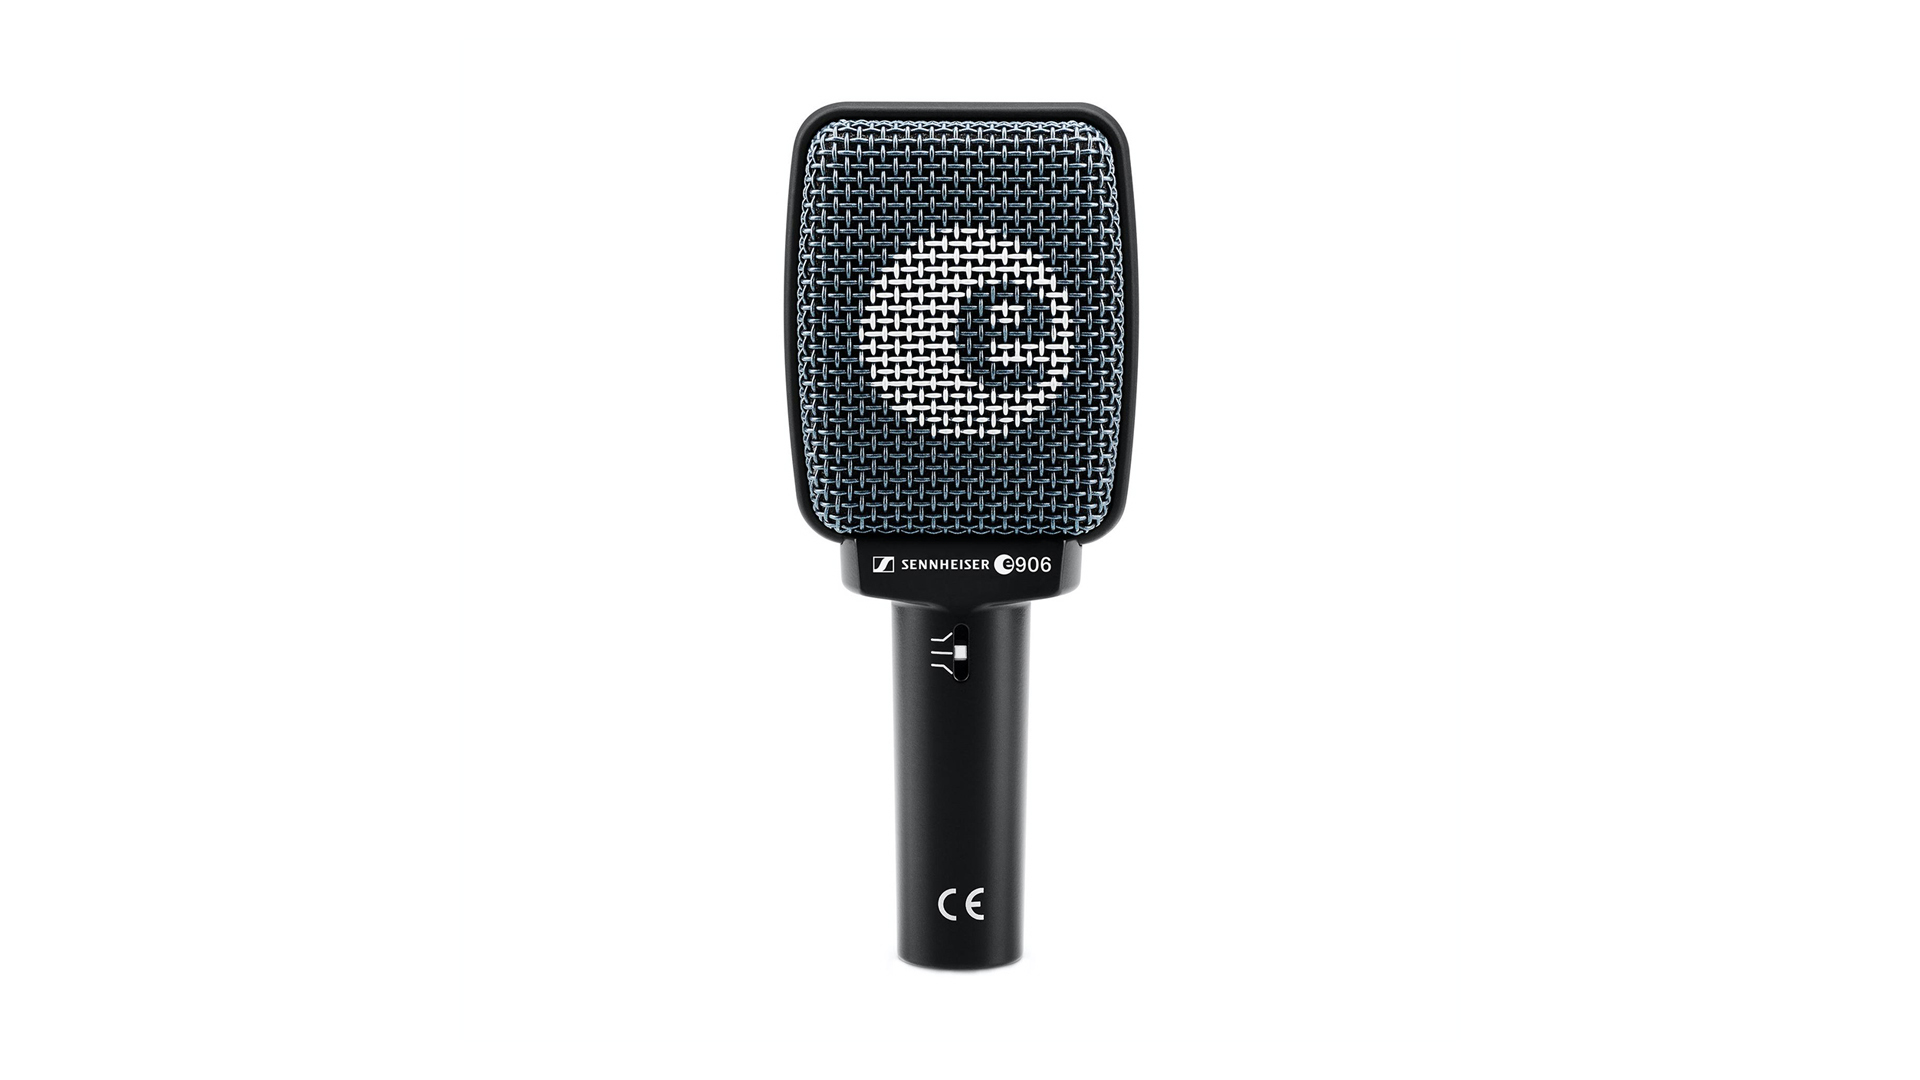 Hire Sennheiser e606 guitar, drum and percussion microphone in Cardiff, Newport, Swansea, Carmarthenshire, Pembrokeshire, South West Wales